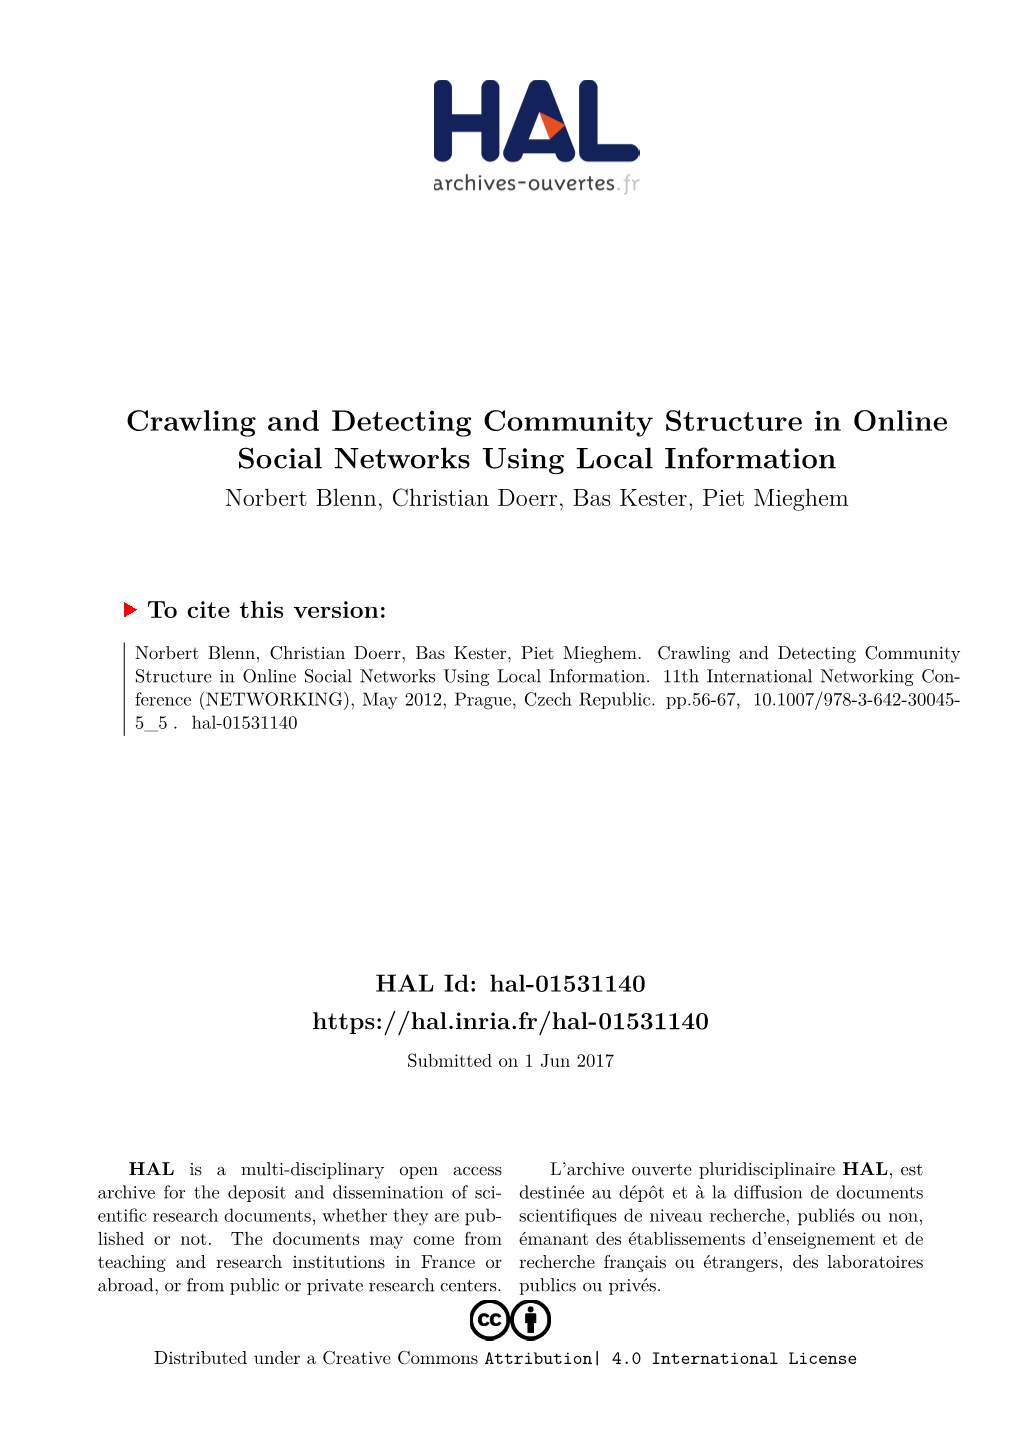 Crawling and Detecting Community Structure in Online Social Networks Using Local Information Norbert Blenn, Christian Doerr, Bas Kester, Piet Mieghem